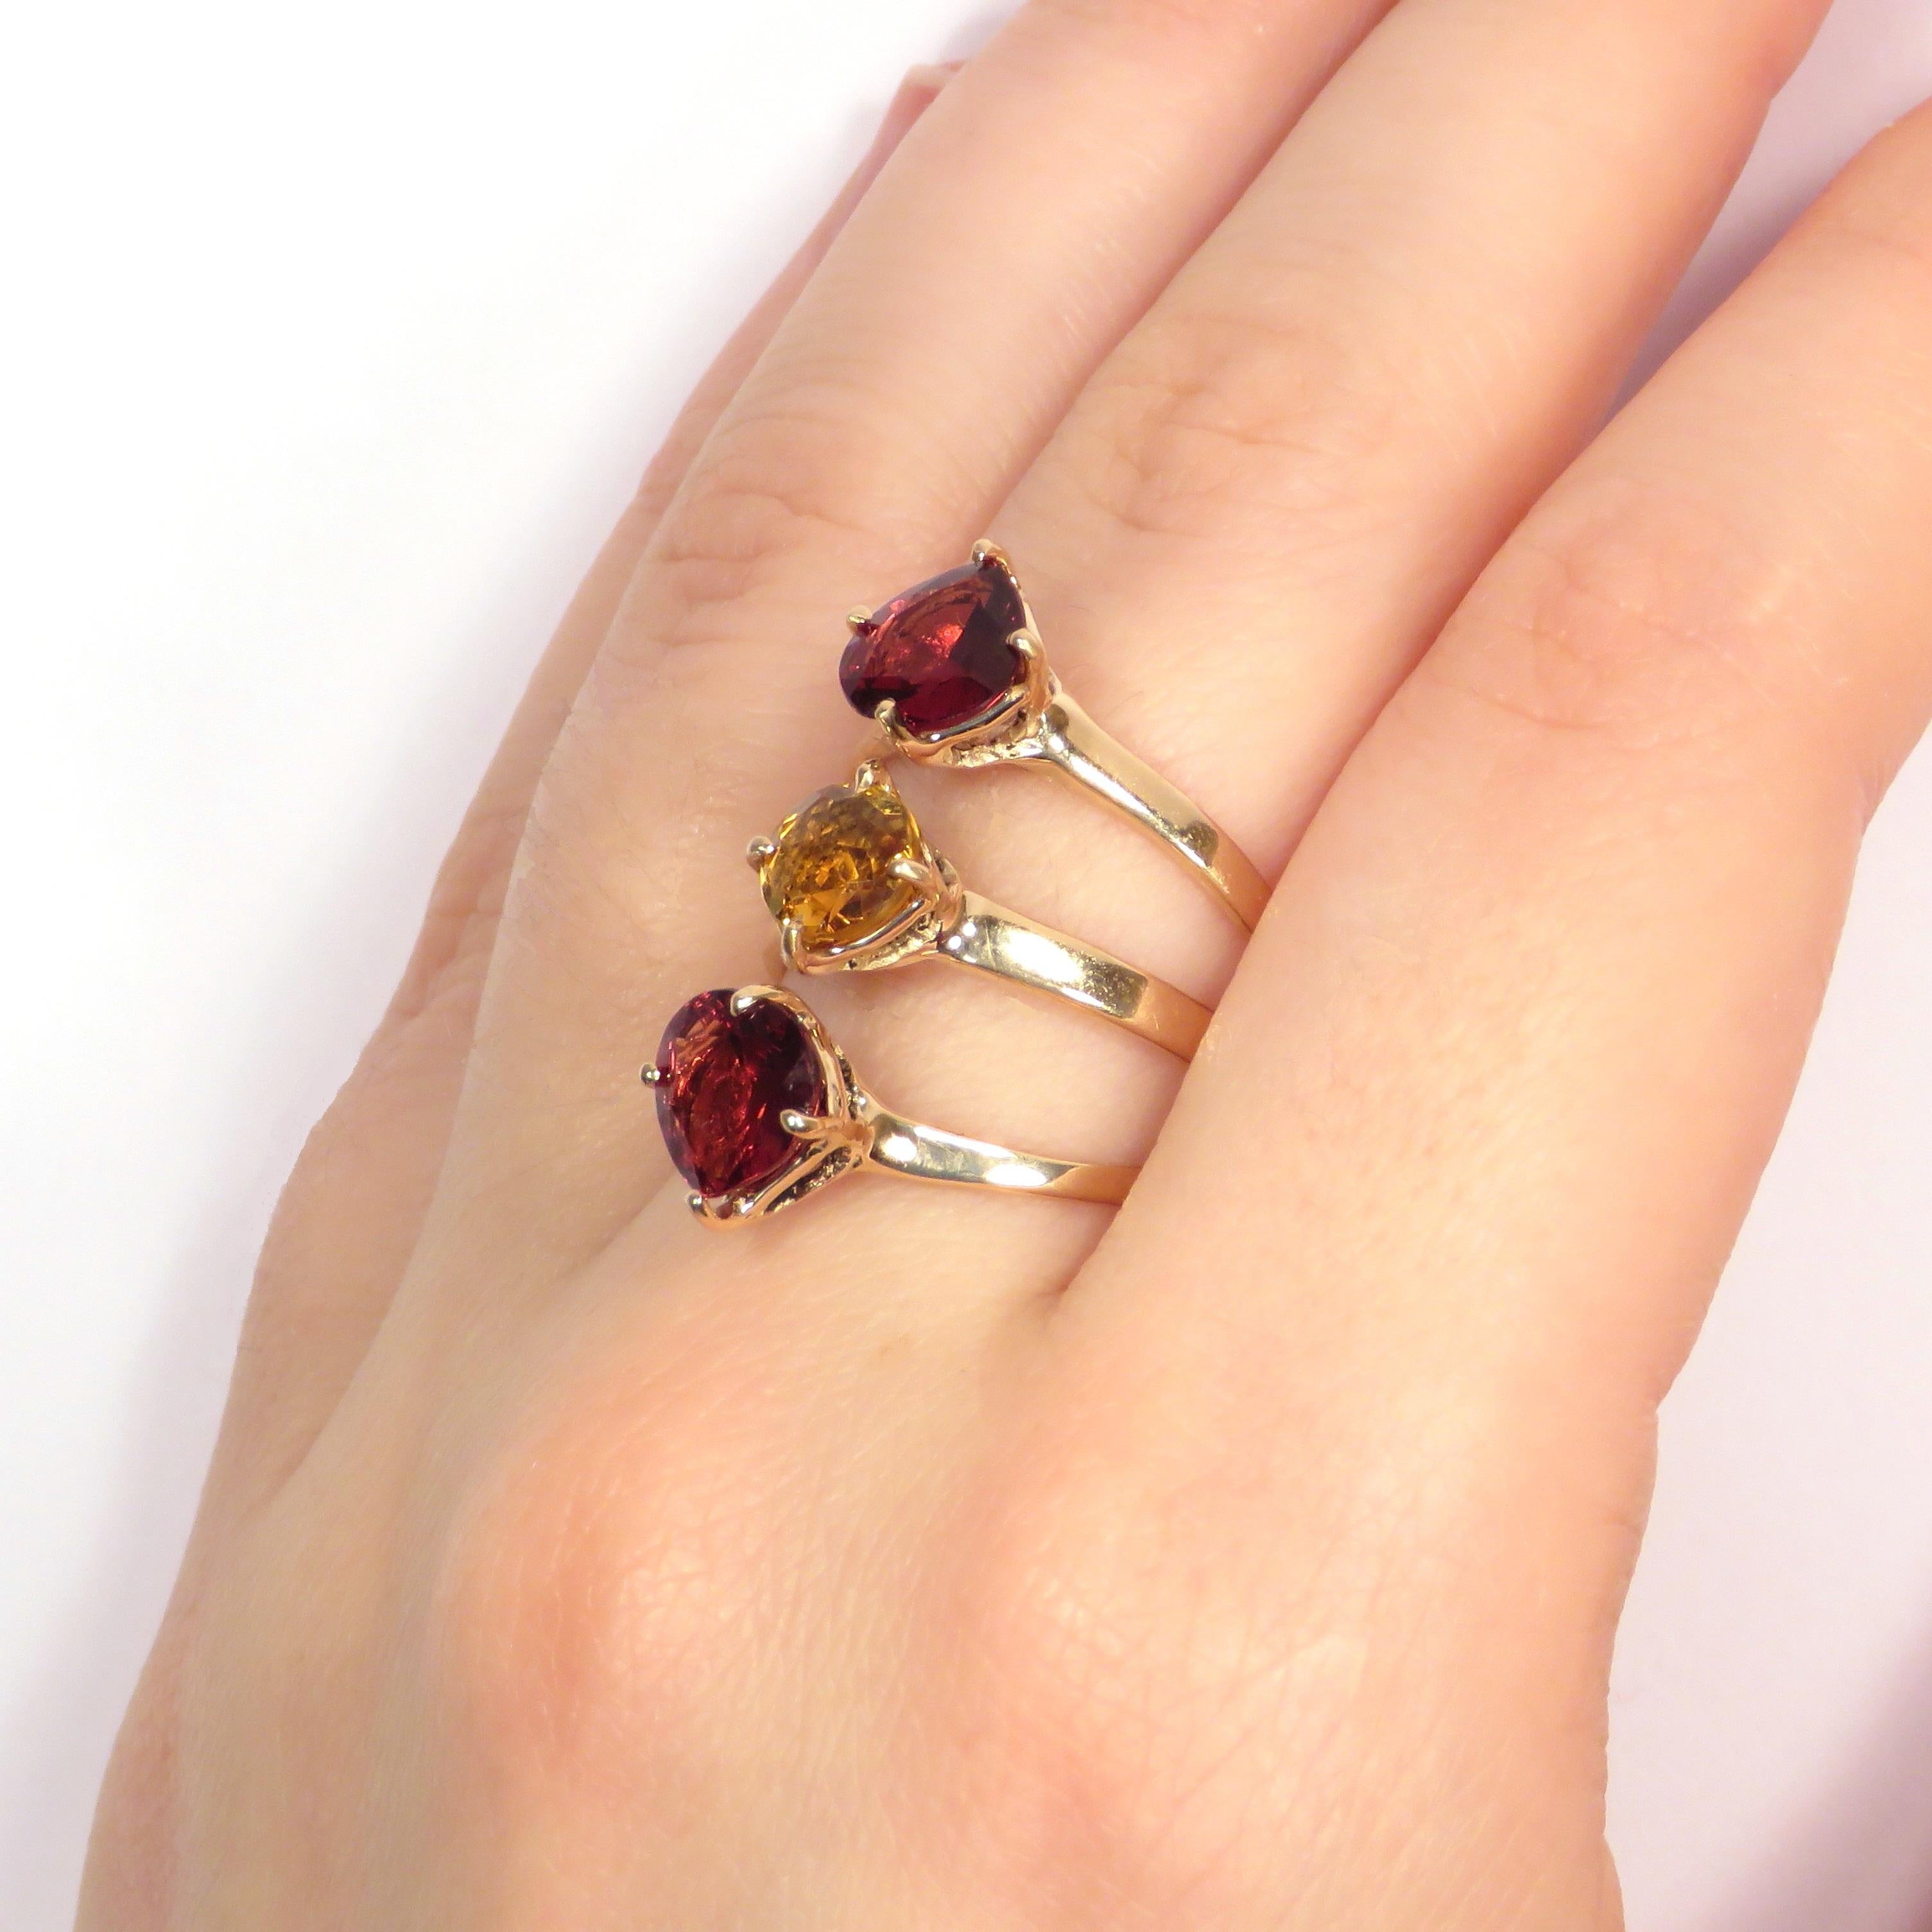 Women's Heart Cut Garnet Rose Cut Citrine 9 Karat Rose Gold Ring Handcrafted in Italy For Sale